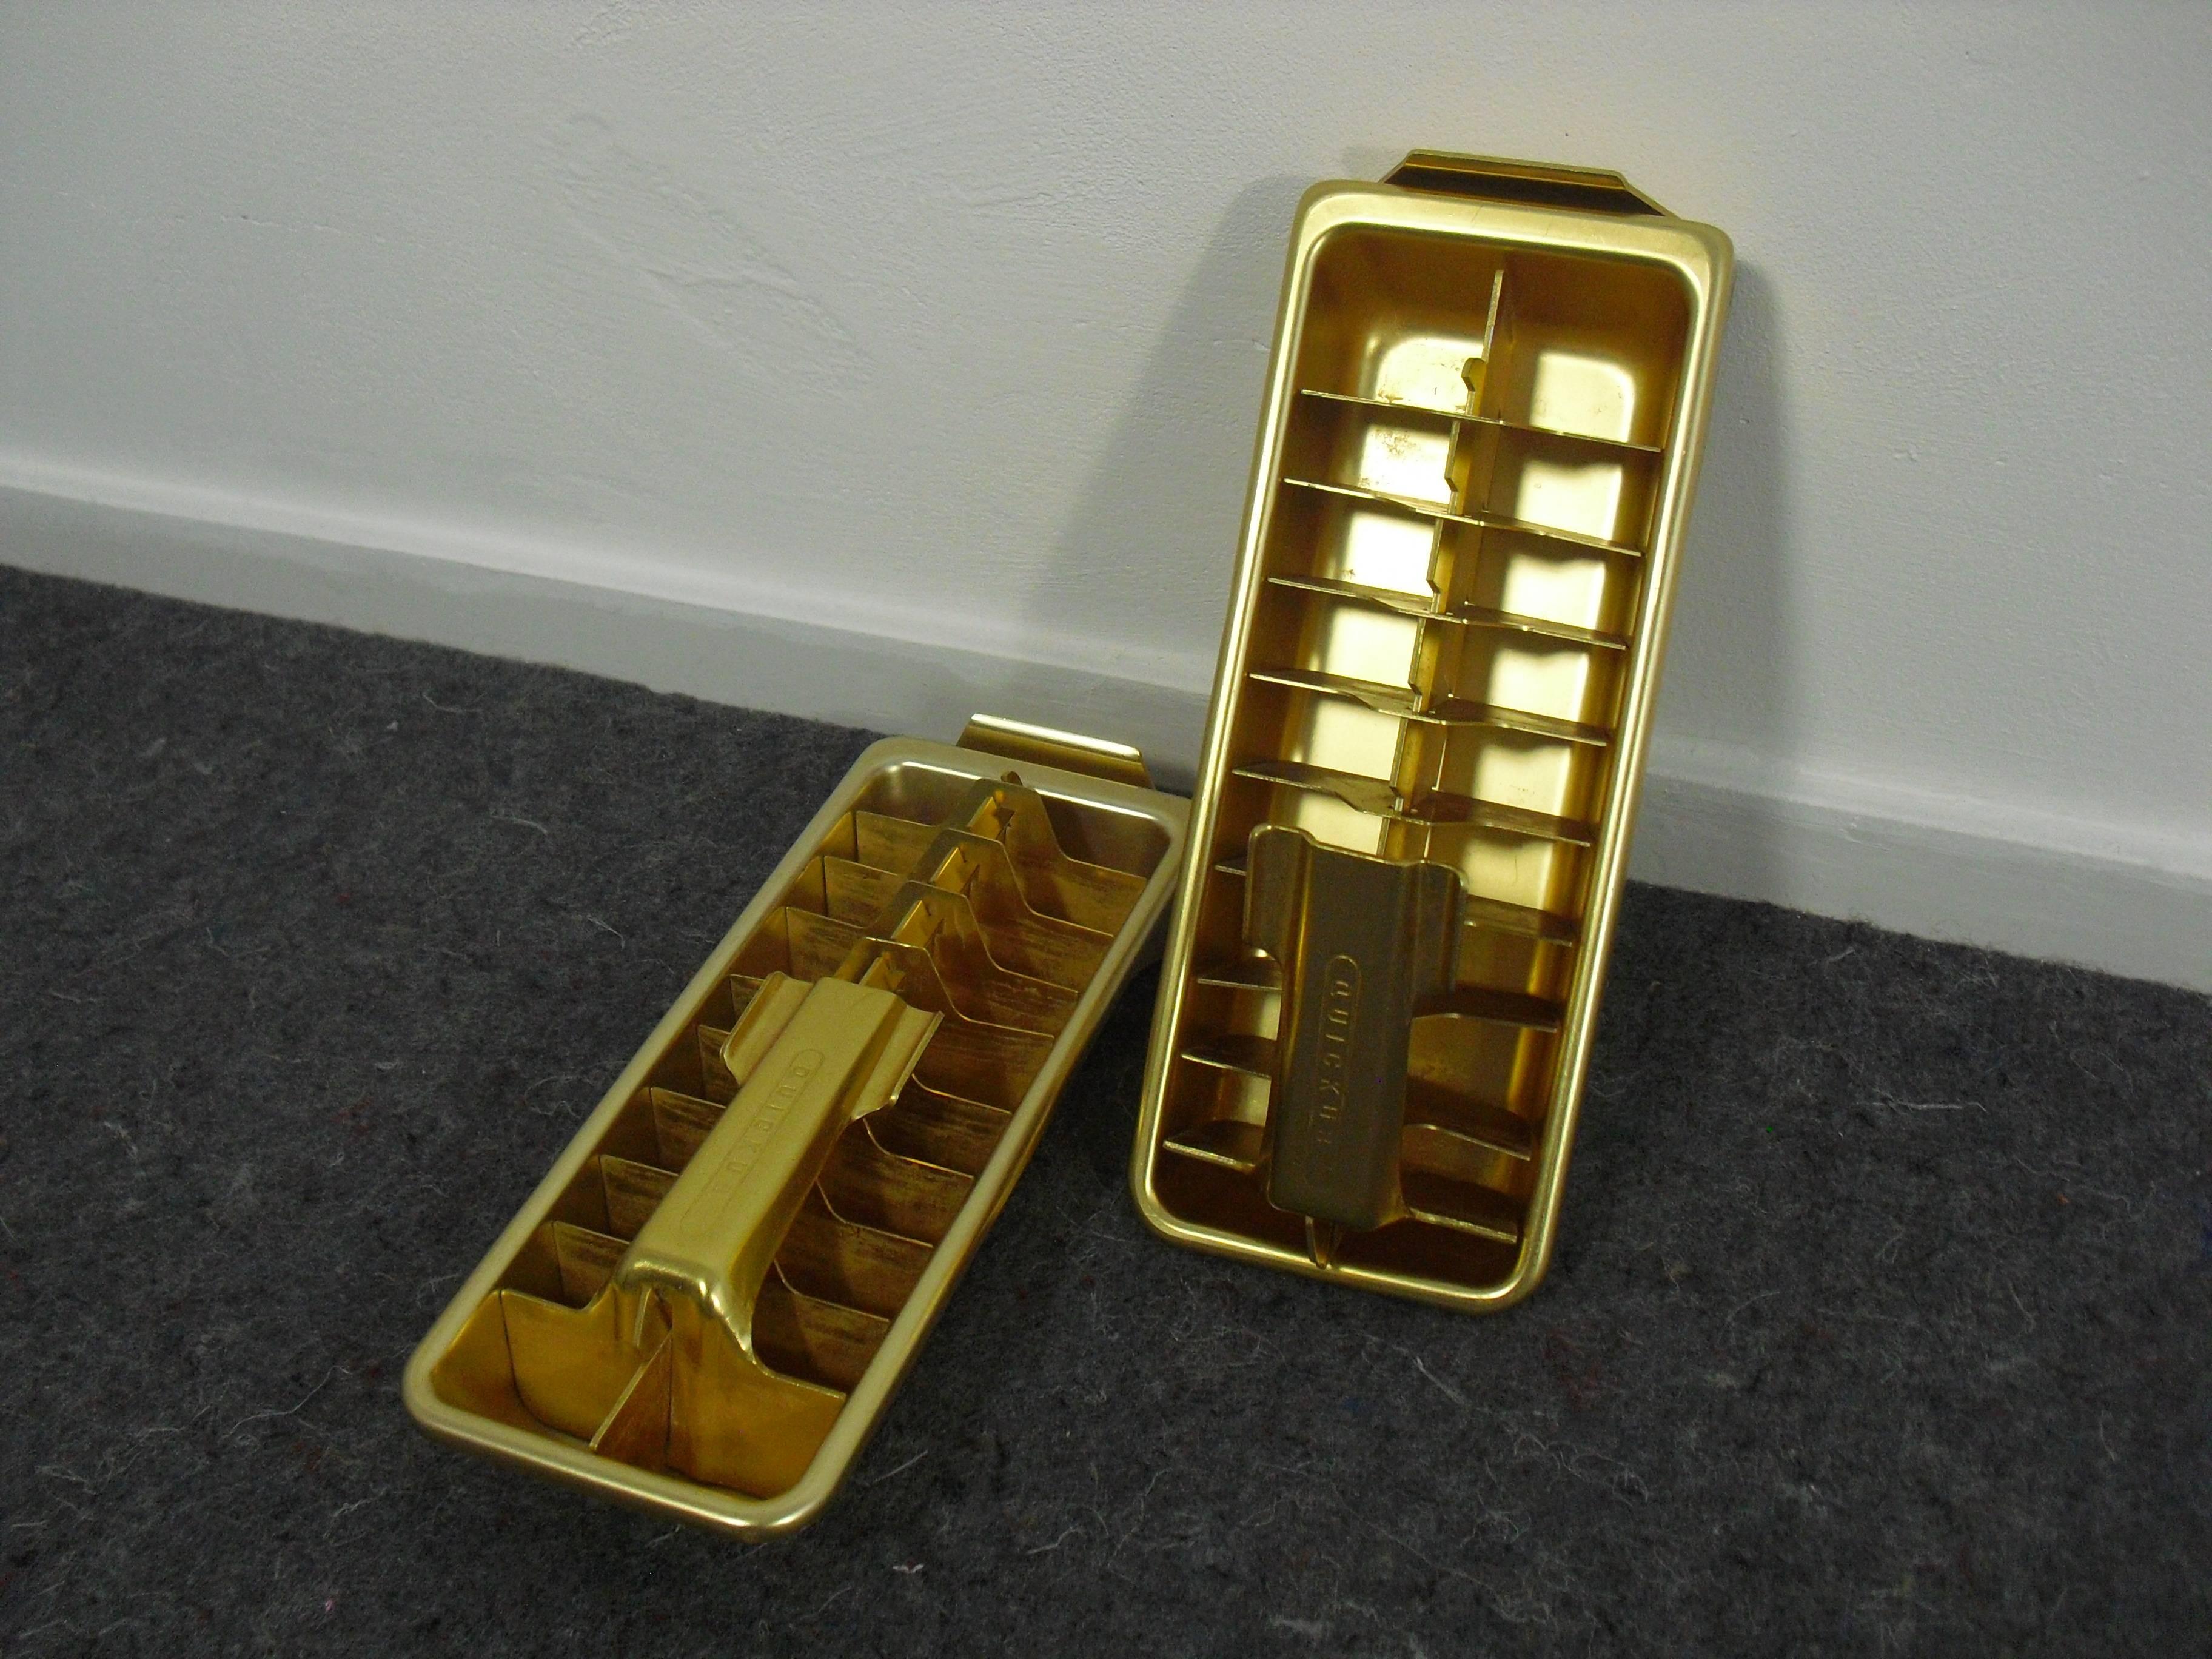 Stunning pair of Brass / Gold colored metal Ice Cube Tray's by 'Quick Ice' 

Designed by American engineer Edward Roberts during the 1950's.

Enclosed engeneer drawings and advertisement from the fifties.

Dimensions: L 28 cm x W 11,5 cm x H 4